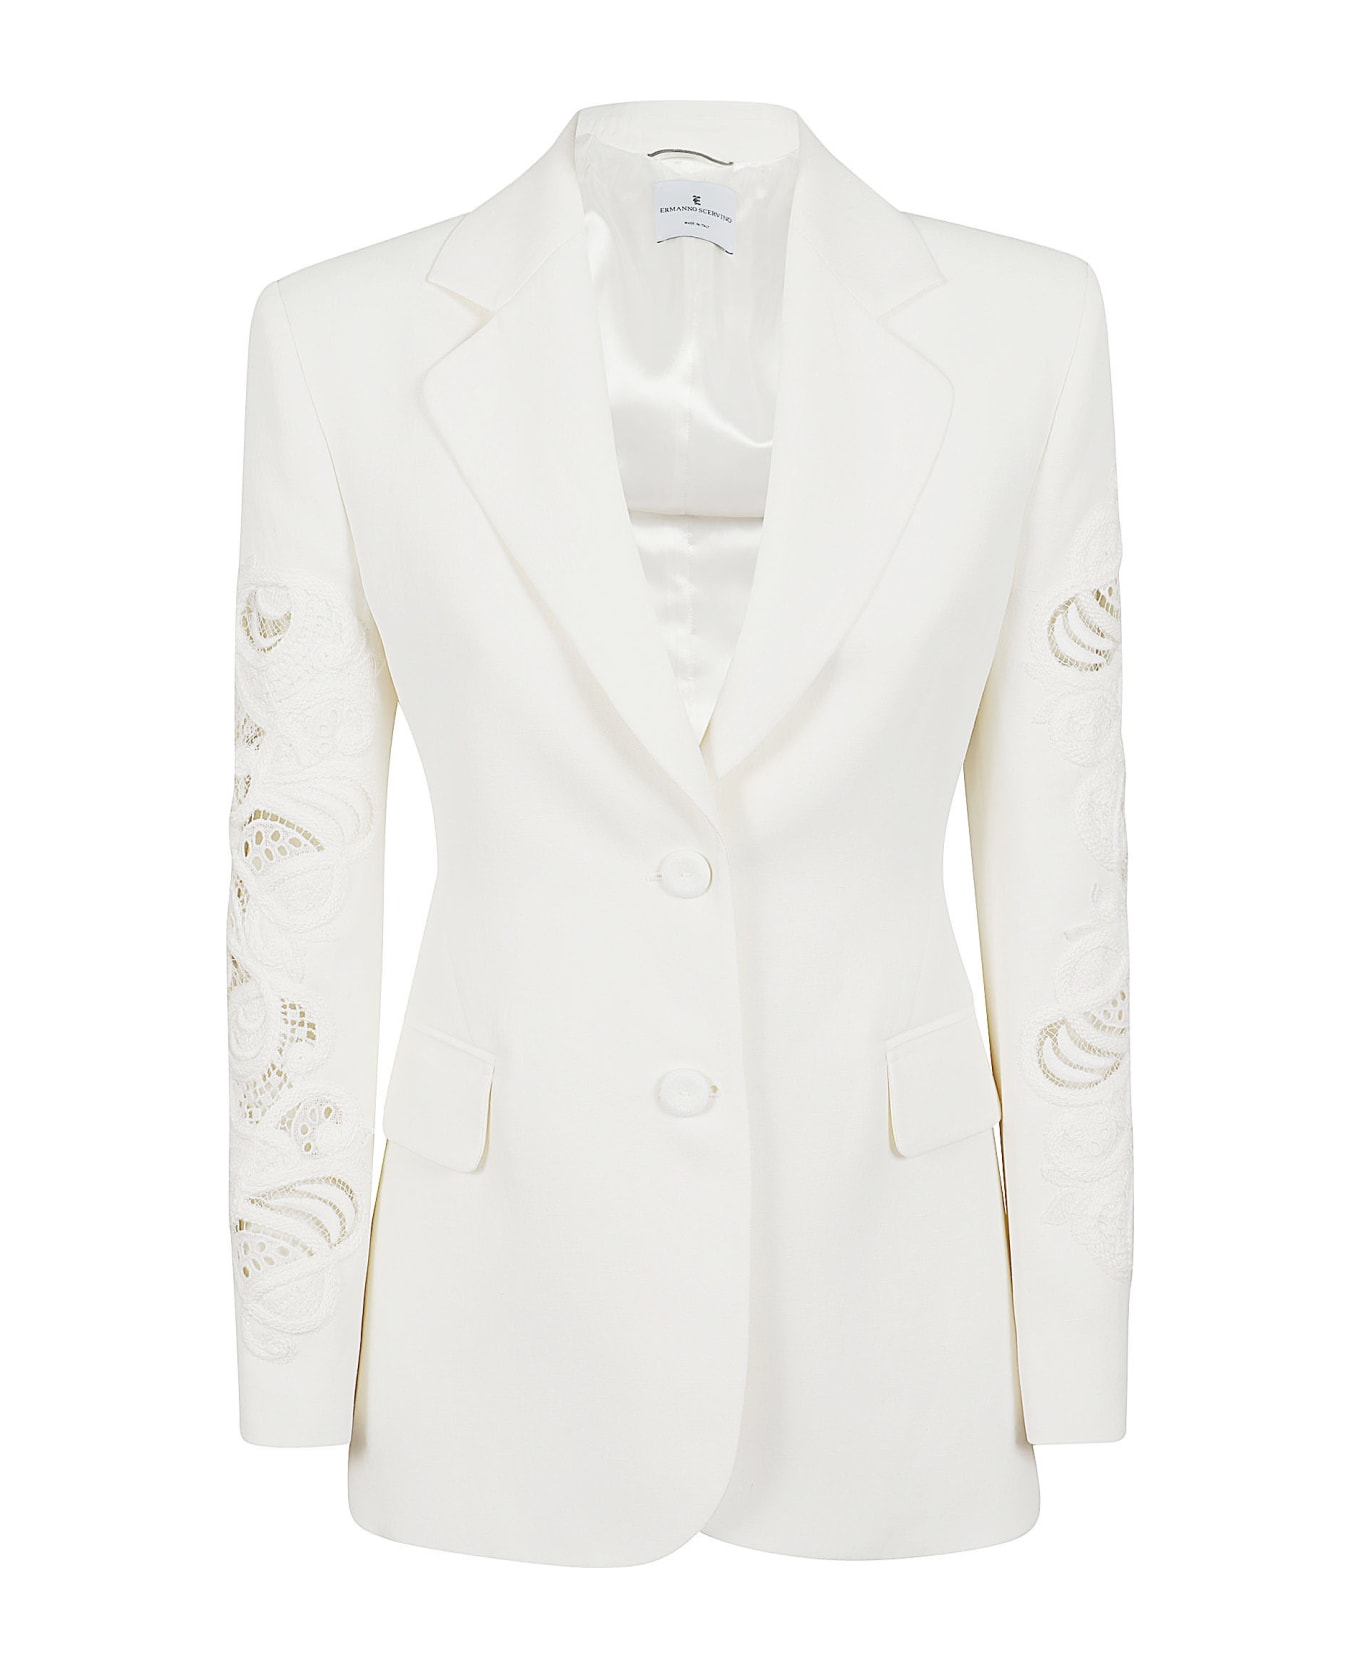 Ermanno Scervino Single-breasted Jacket - Blanc ブレザー